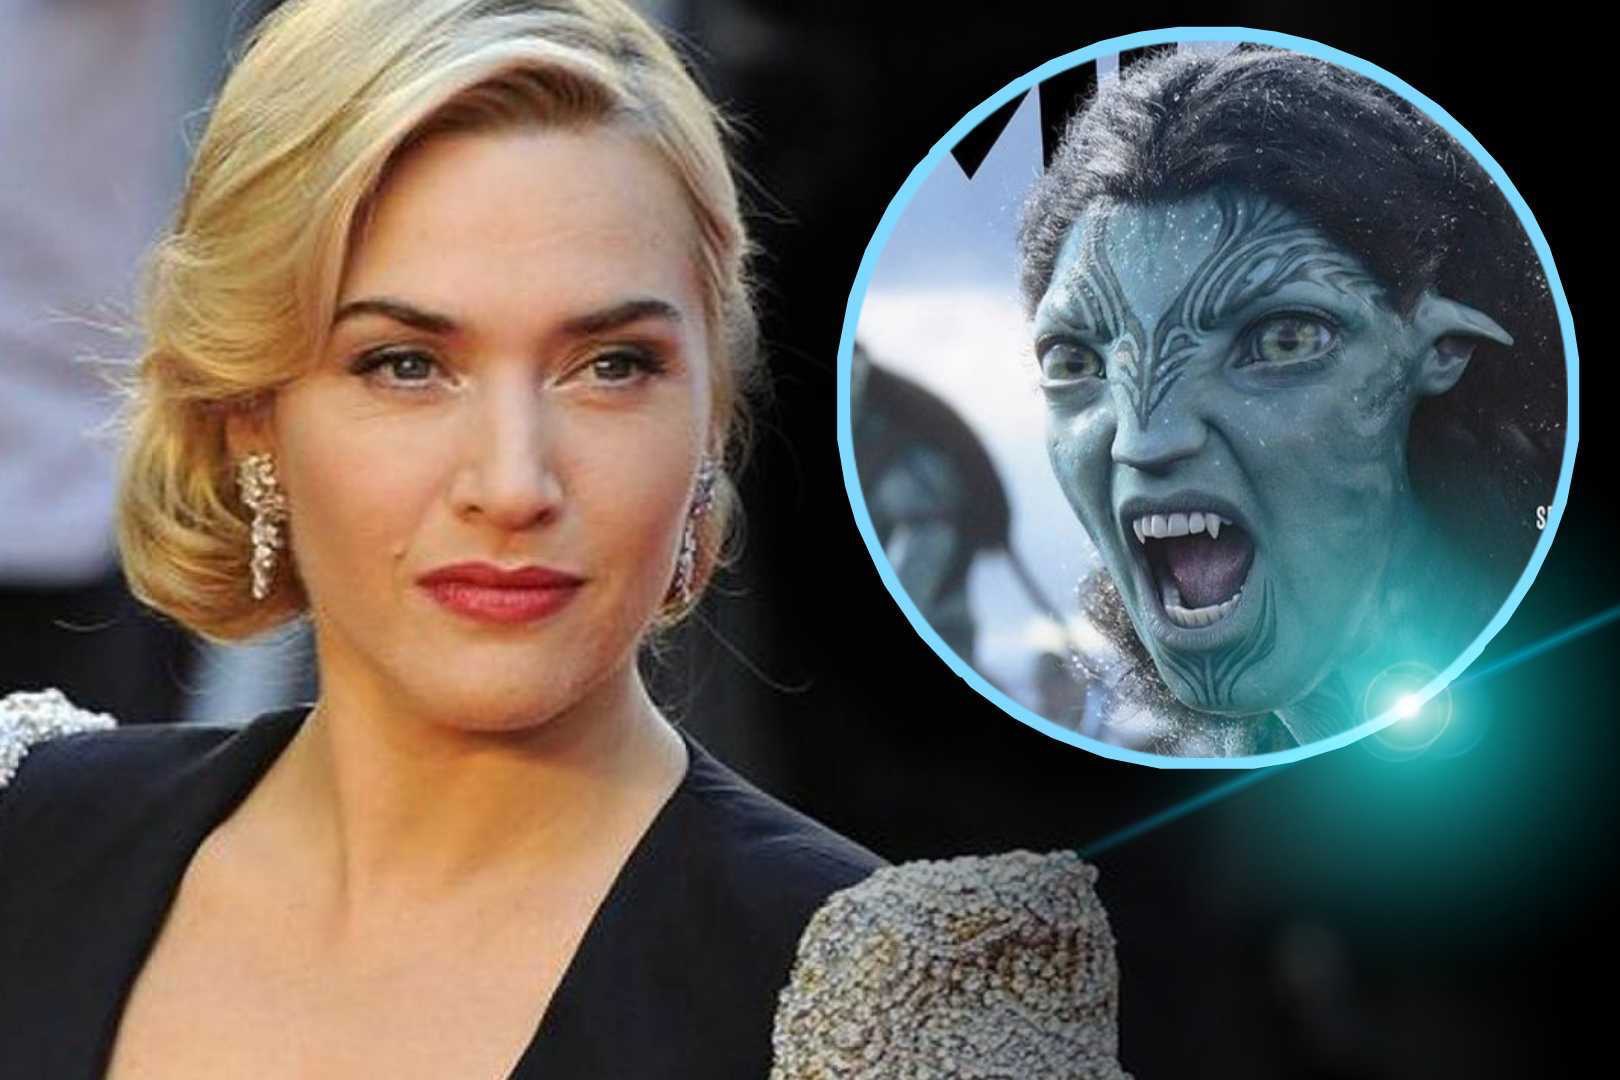 Details About Kate Winslet’s ‘Avatar’ Character Revealed